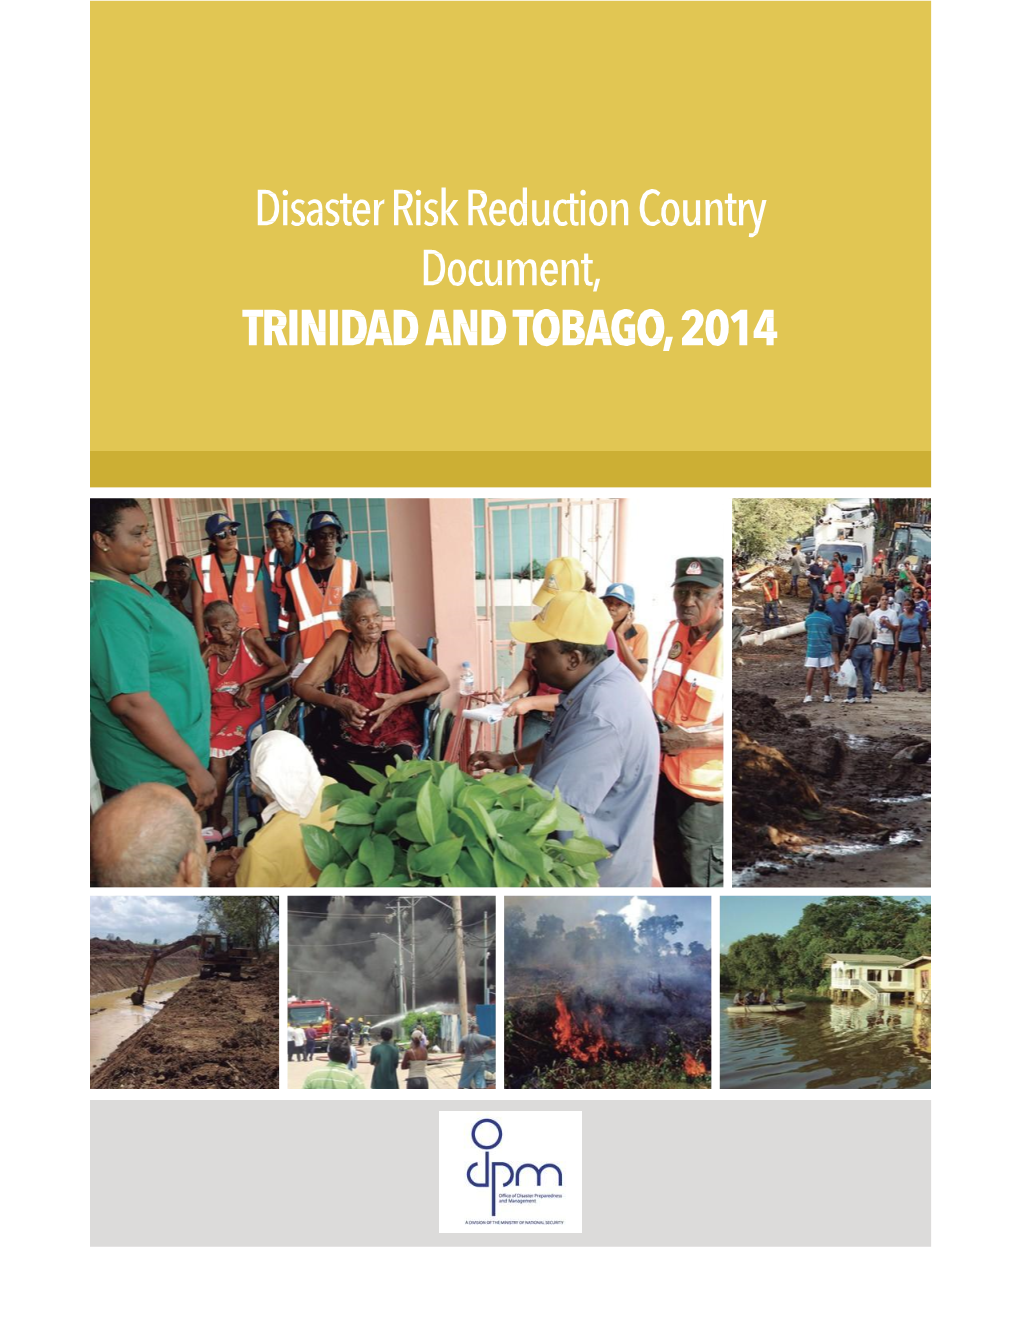 Disaster Risk Reduction Document, Trinidad and Tobago, 2014